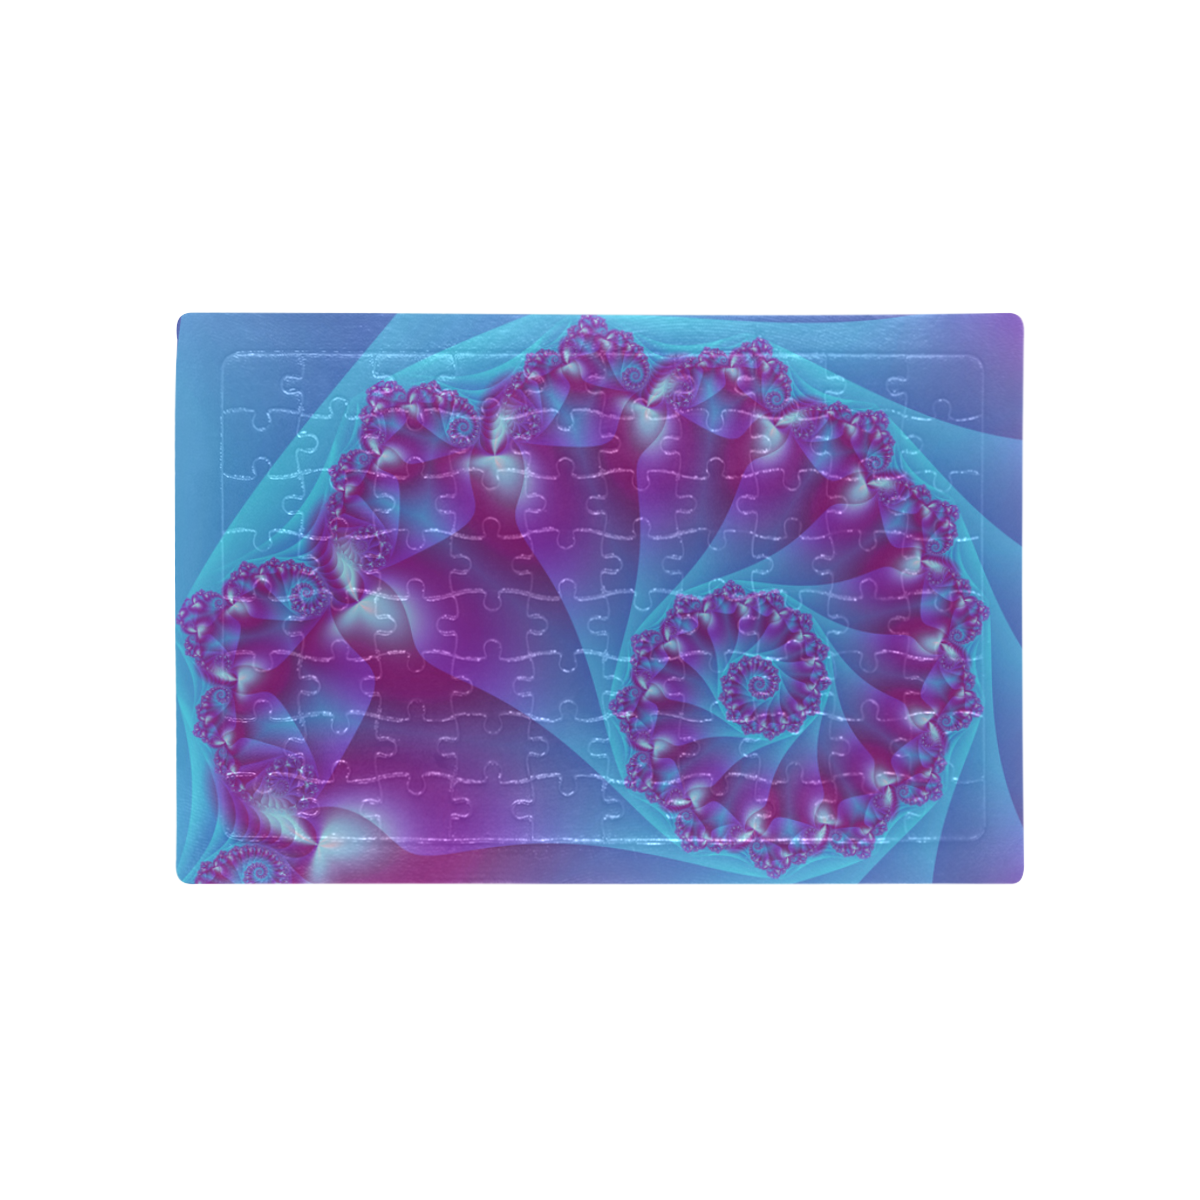 Blue and Purple Fractal Spiral Puzzle A4 Size Jigsaw Puzzle (Set of 80 Pieces)